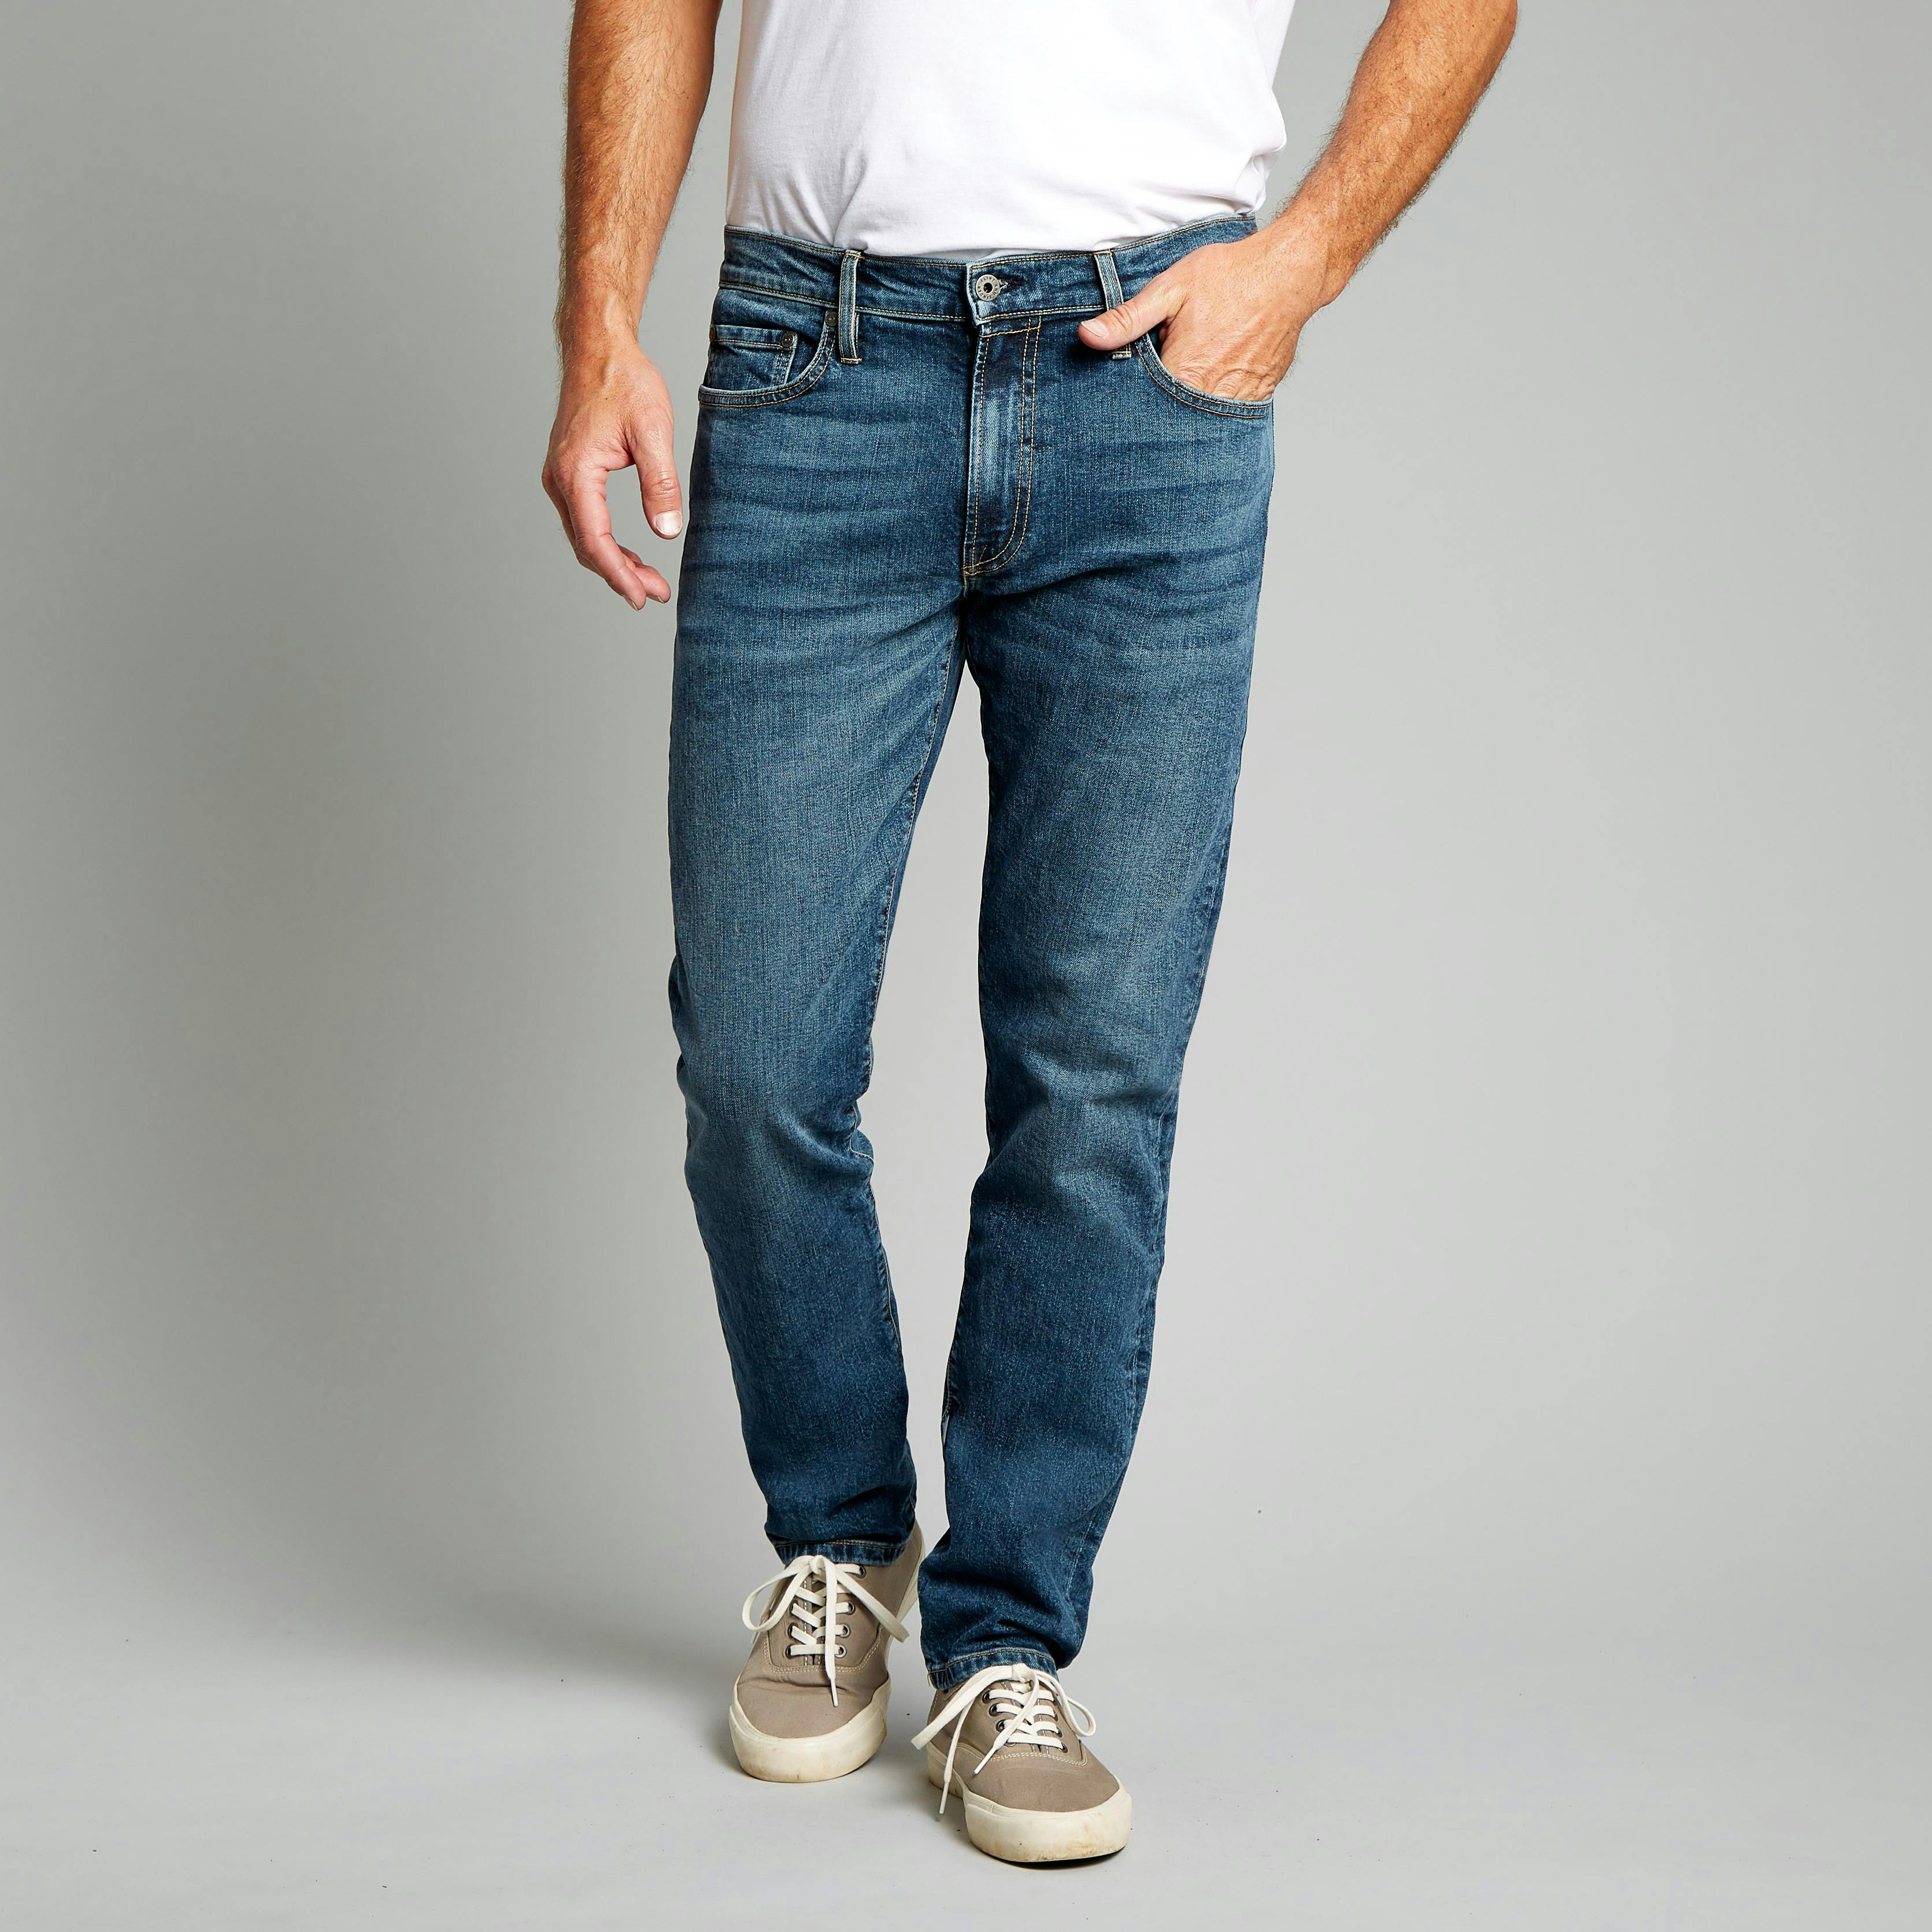 Flint and Tinder 1-Year Wash Jeans - Slim